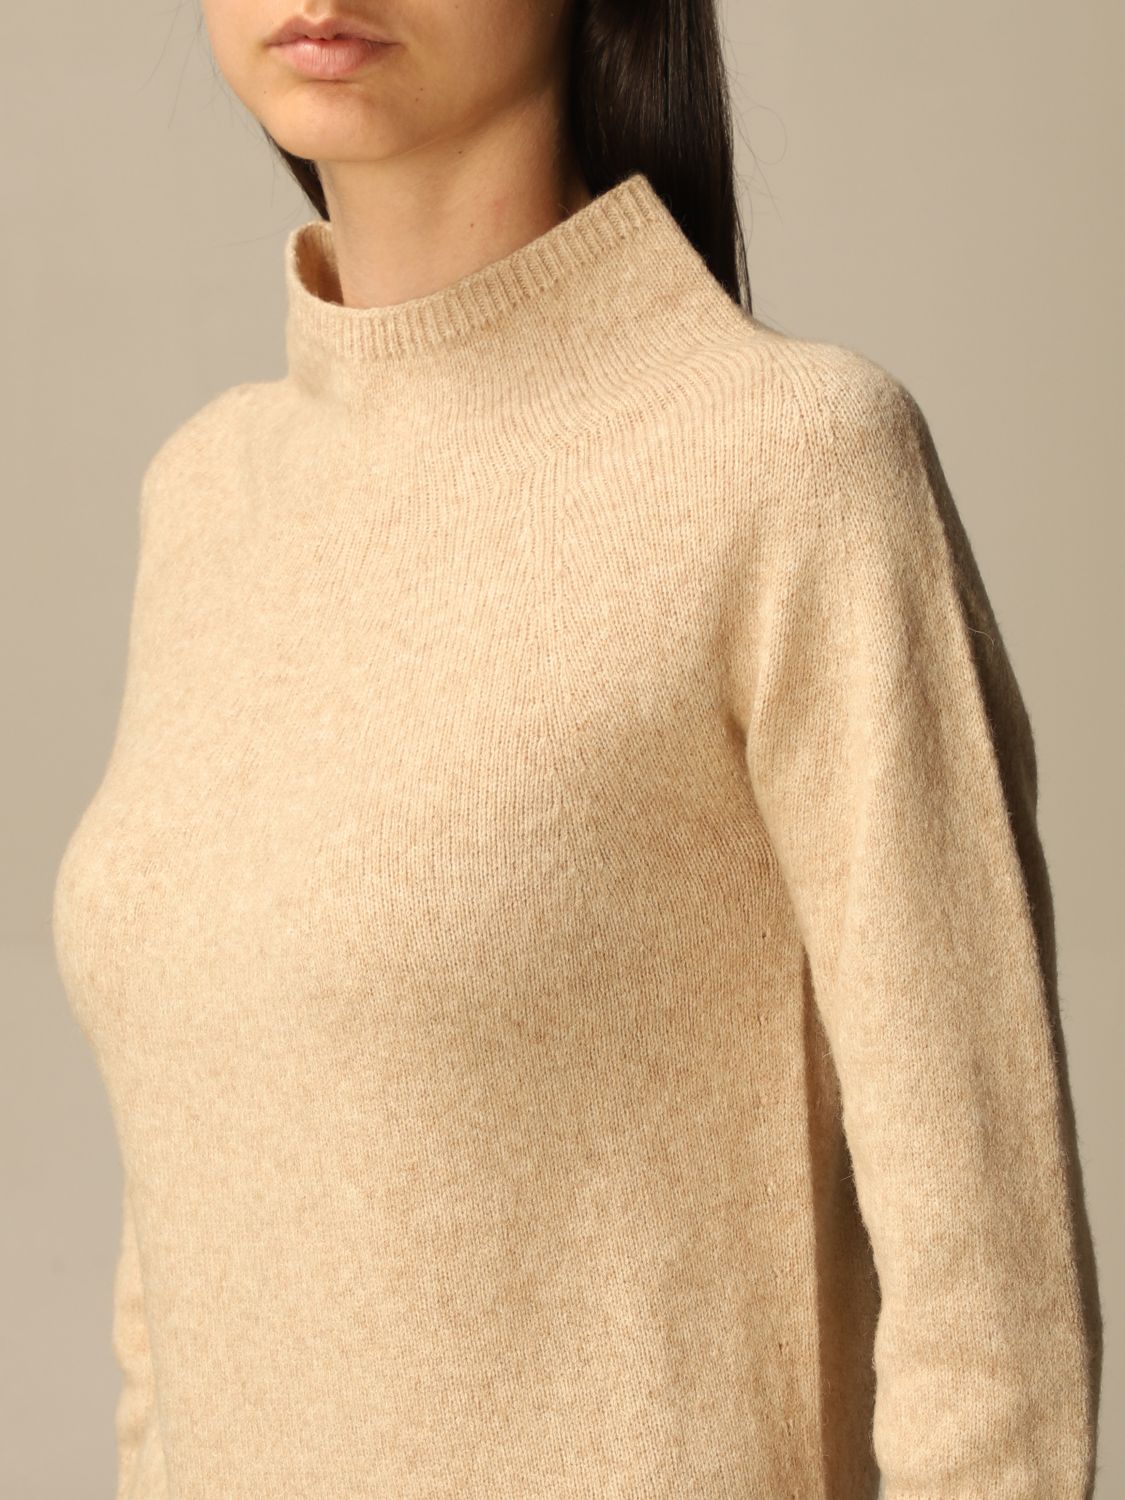 Max Mara Outlet: Campo pullover in wool and cashmere - Beige | Sweater ...